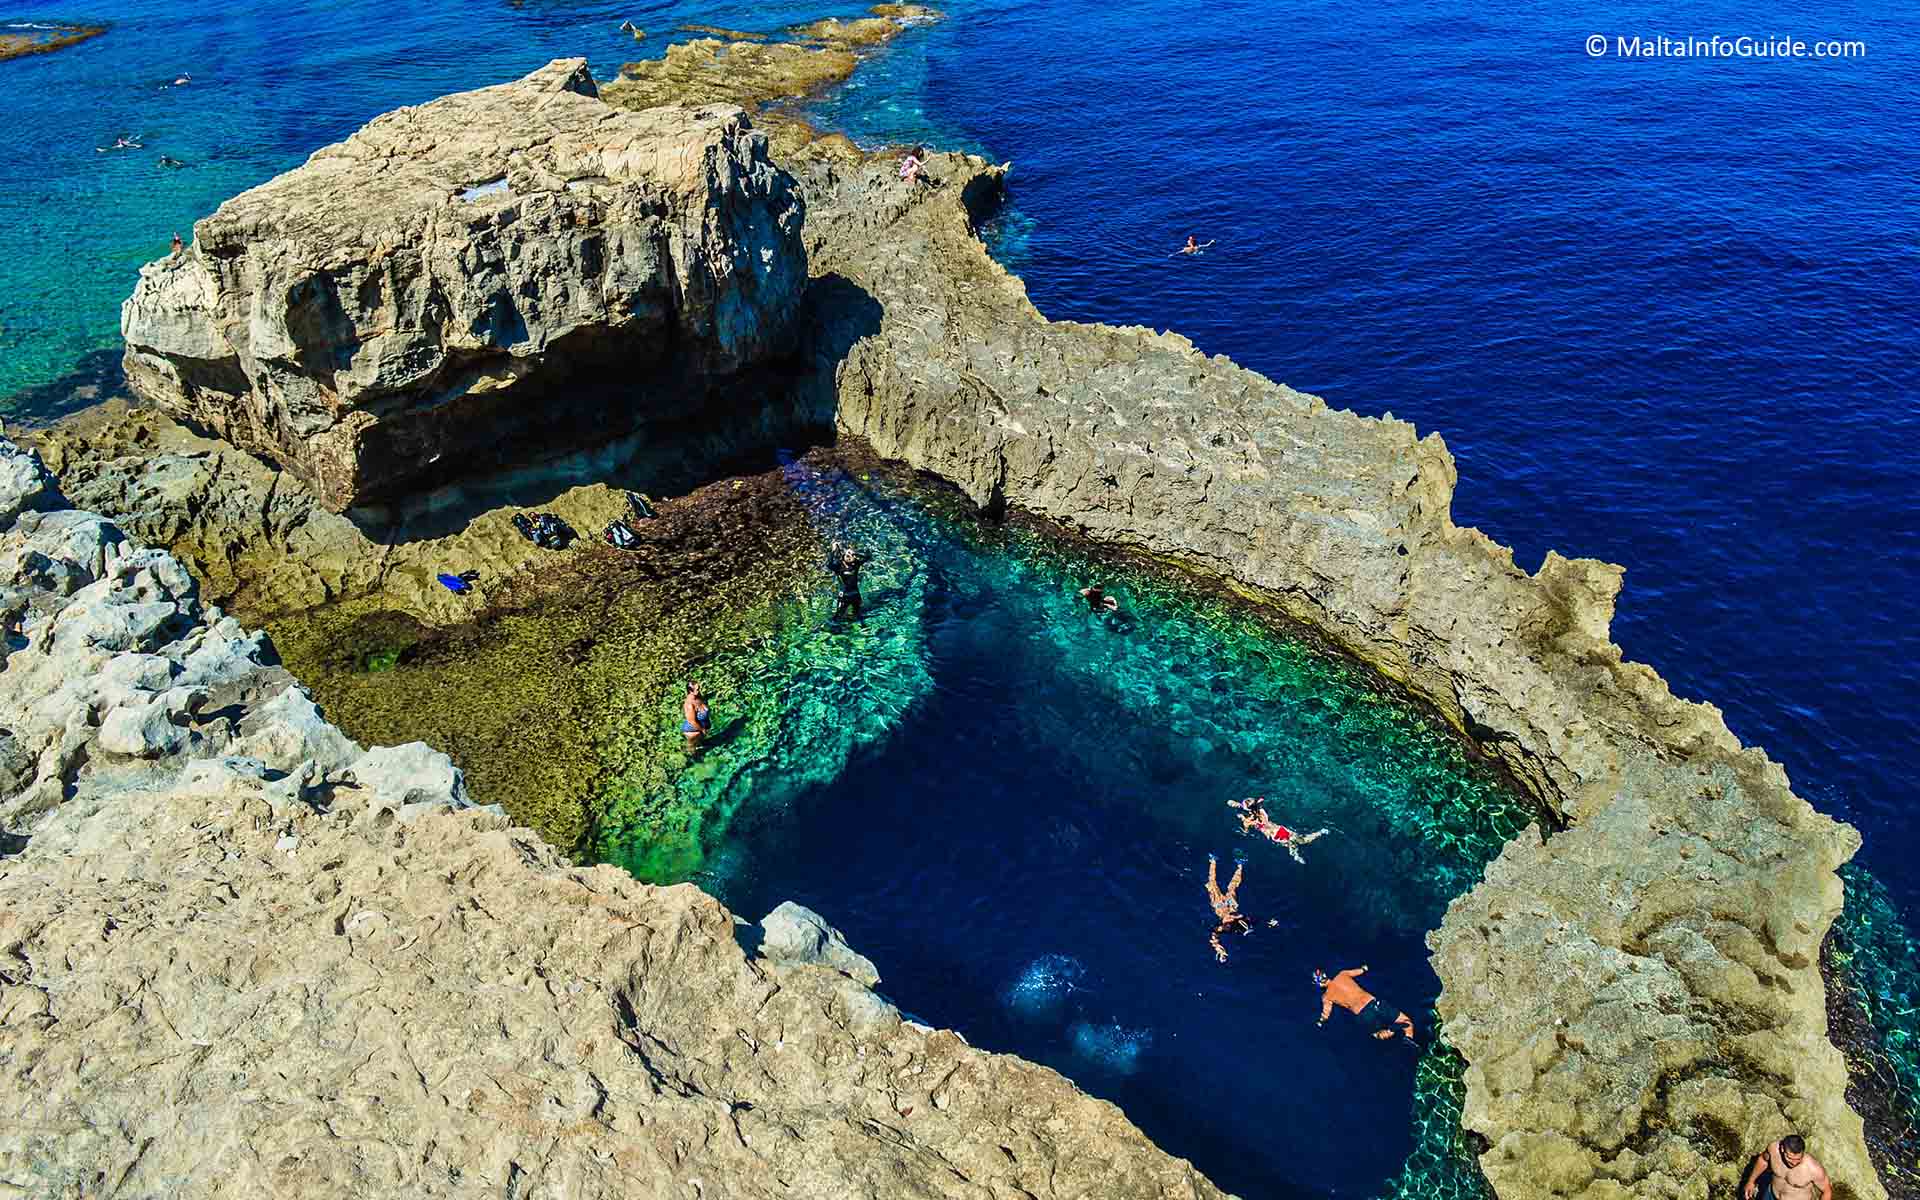 People swimming in the Blue Hole Malta Gozo.